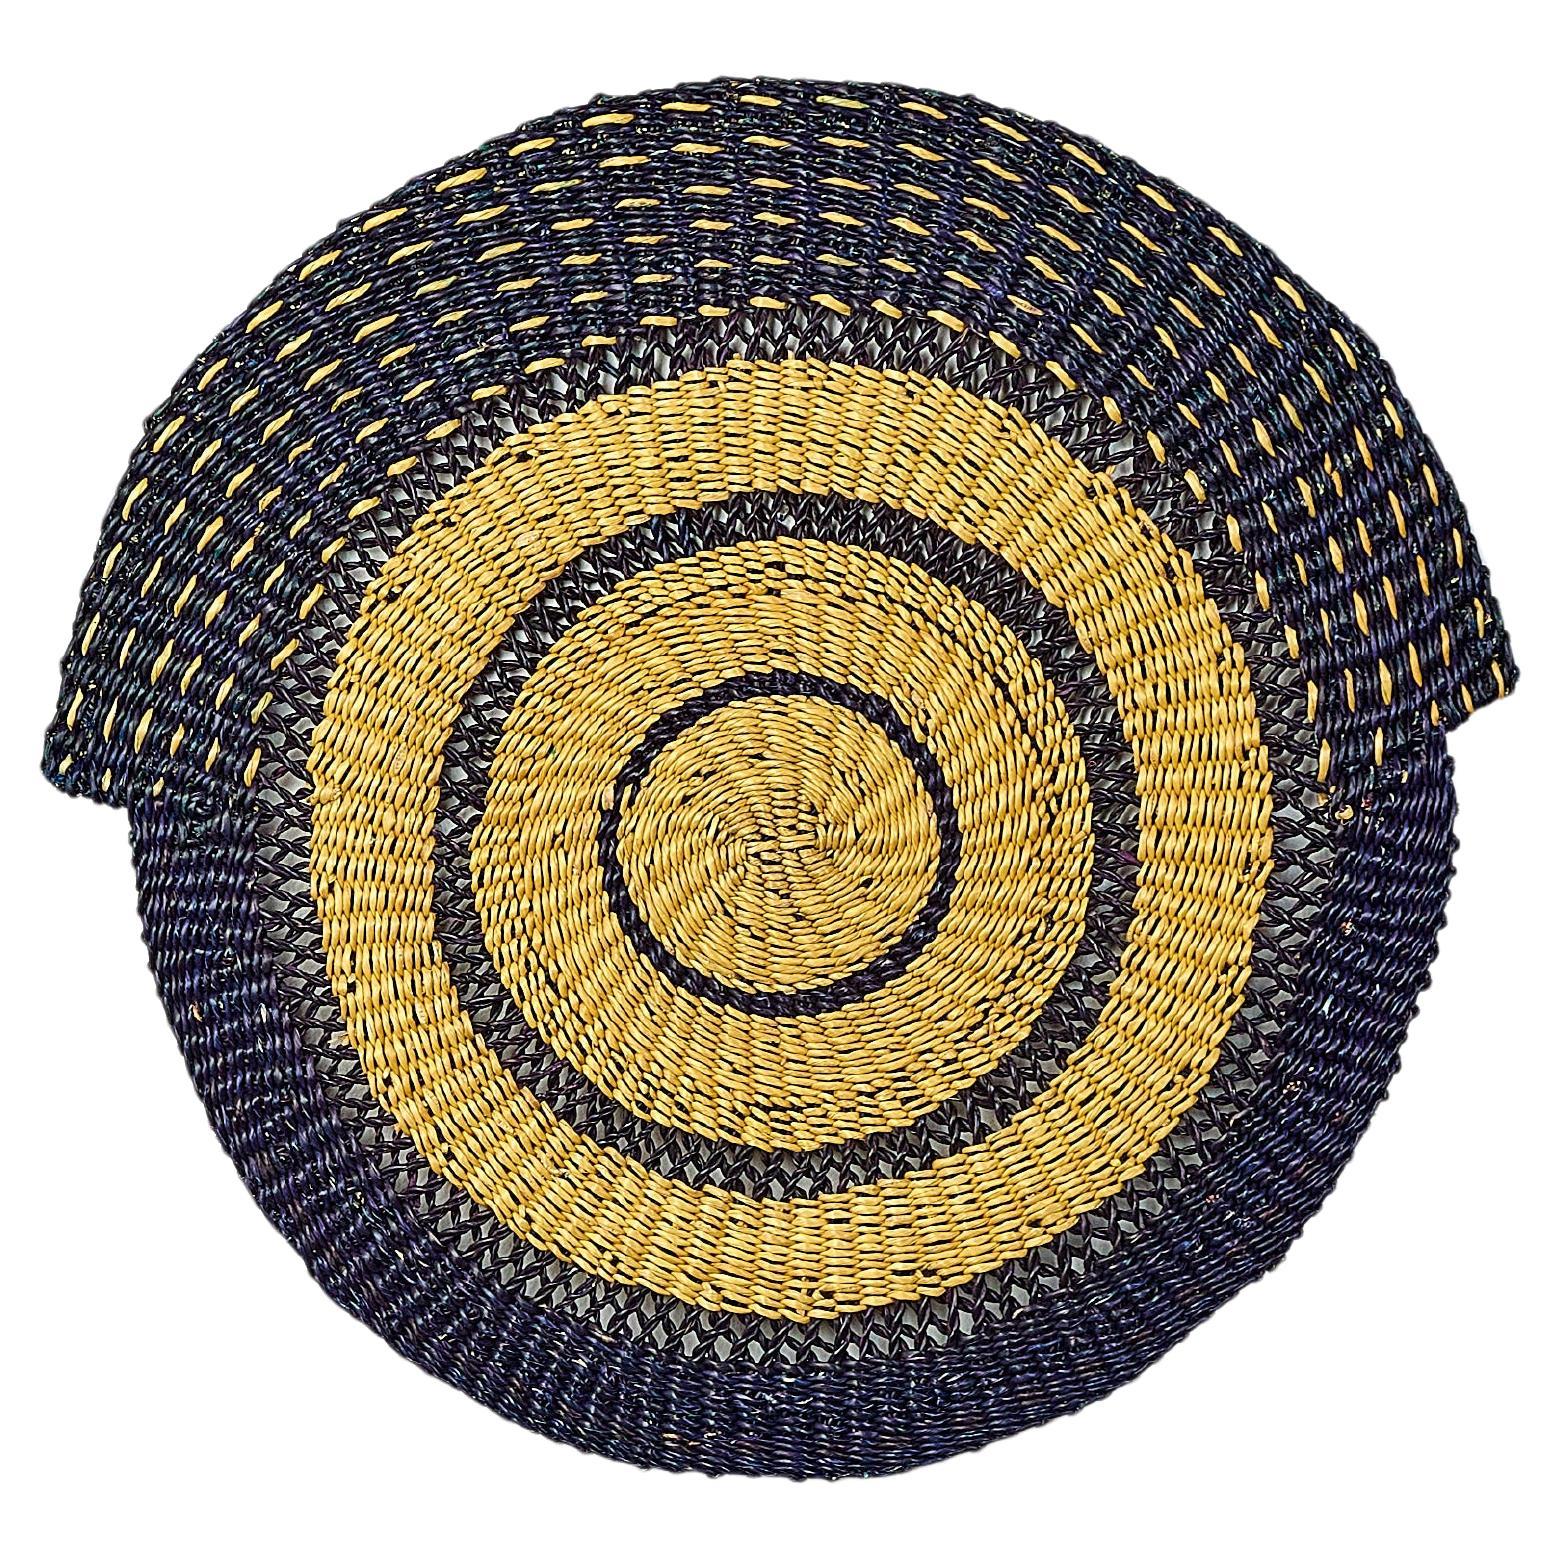 Handwoven Place Mat, Blue Black for Rich African Inspired Dining - Set of 2